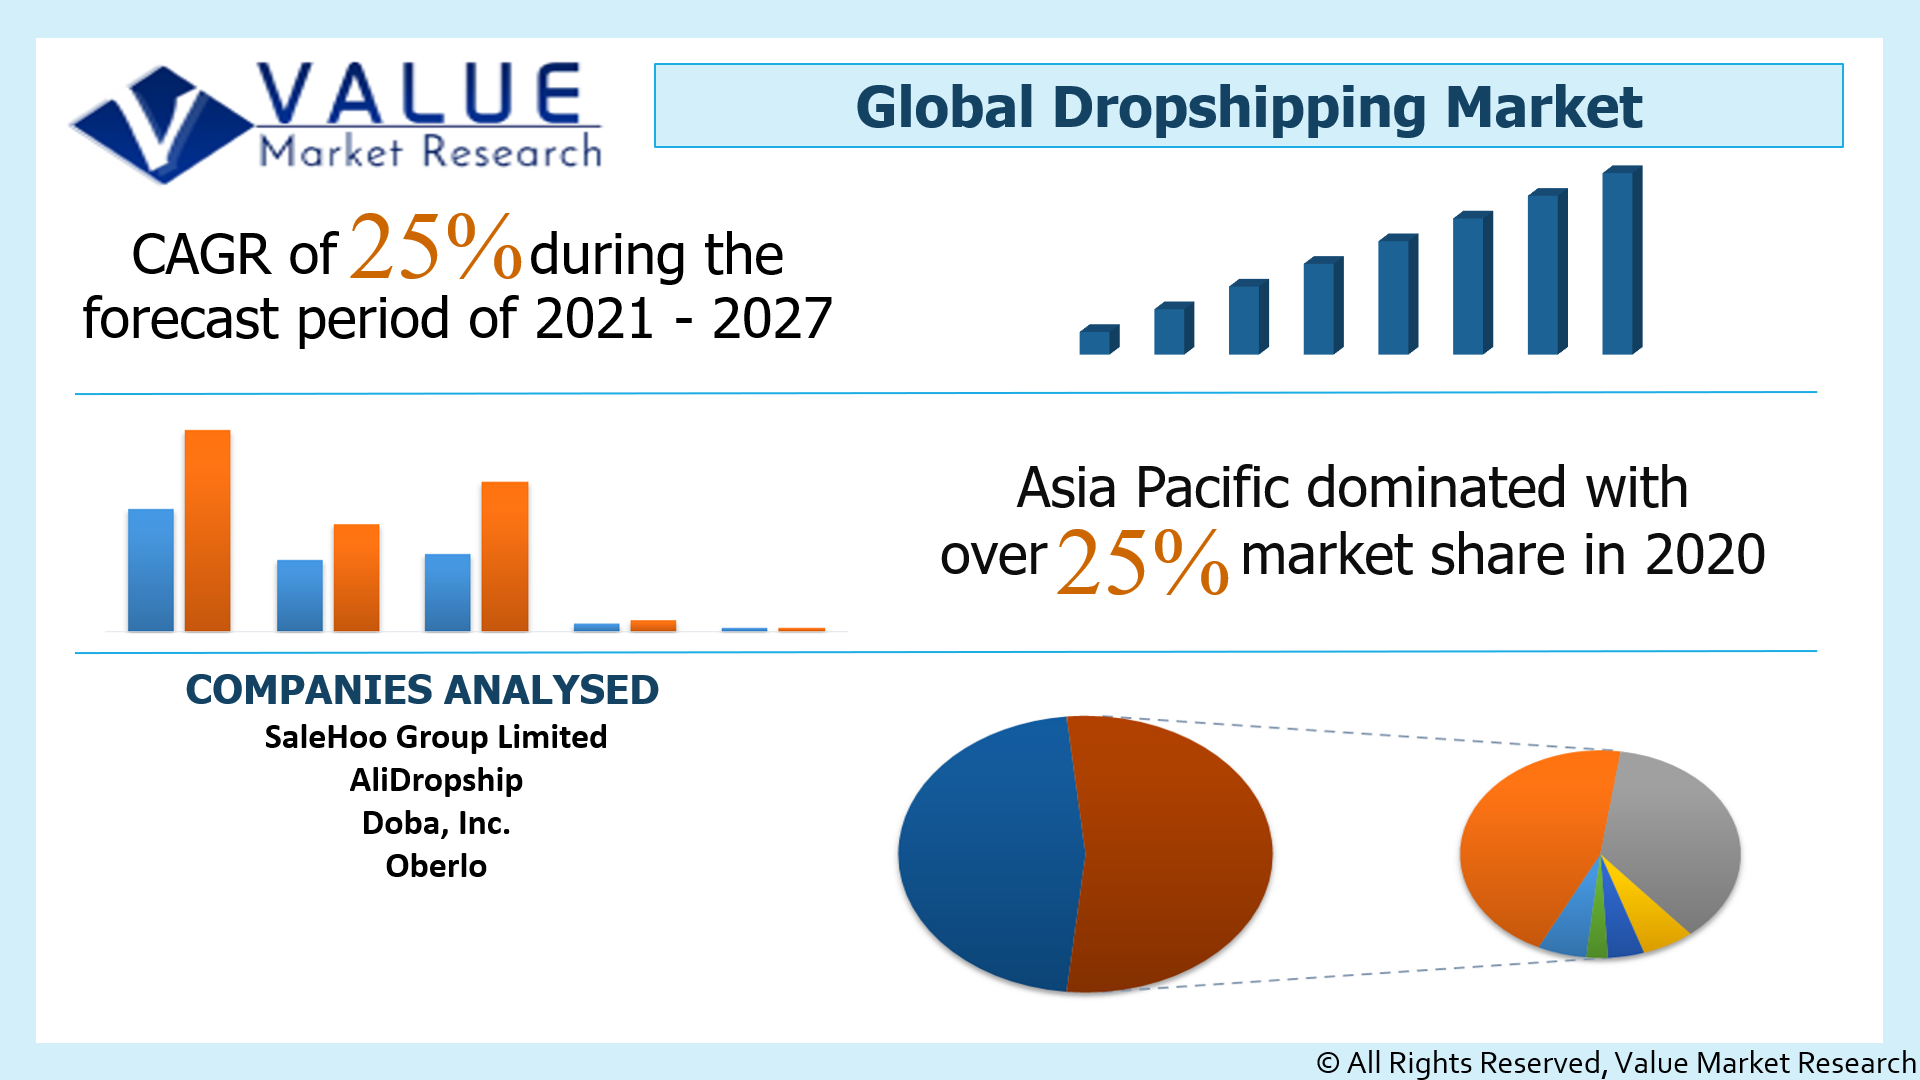 Global Dropshipping Market Share